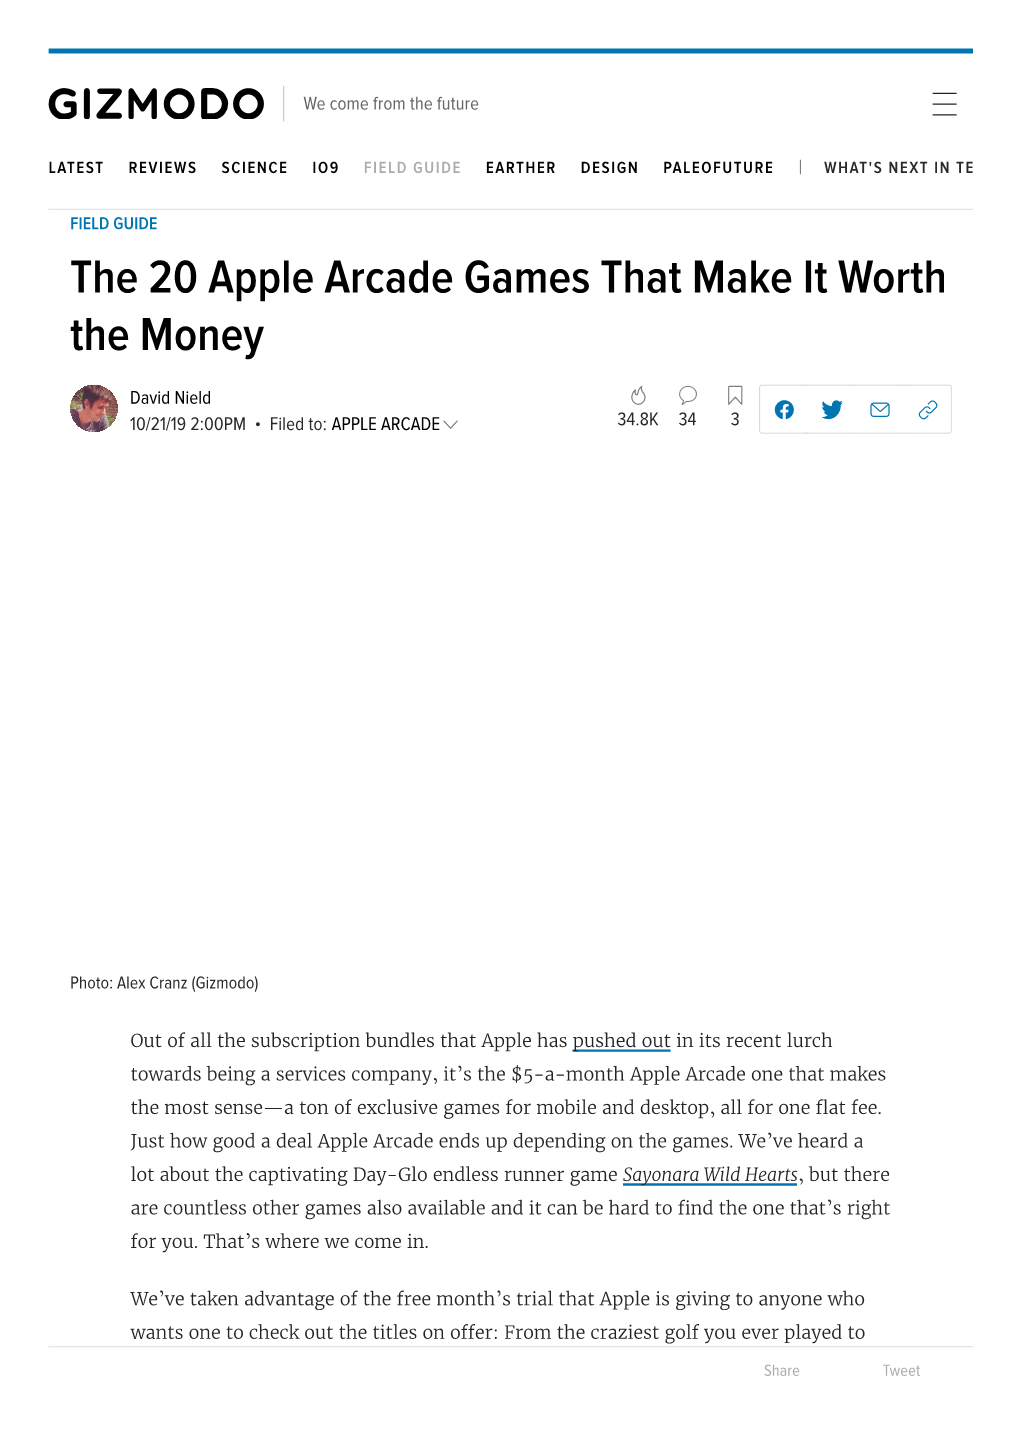 The 20 Apple Arcade Games That Make It Worth the Money